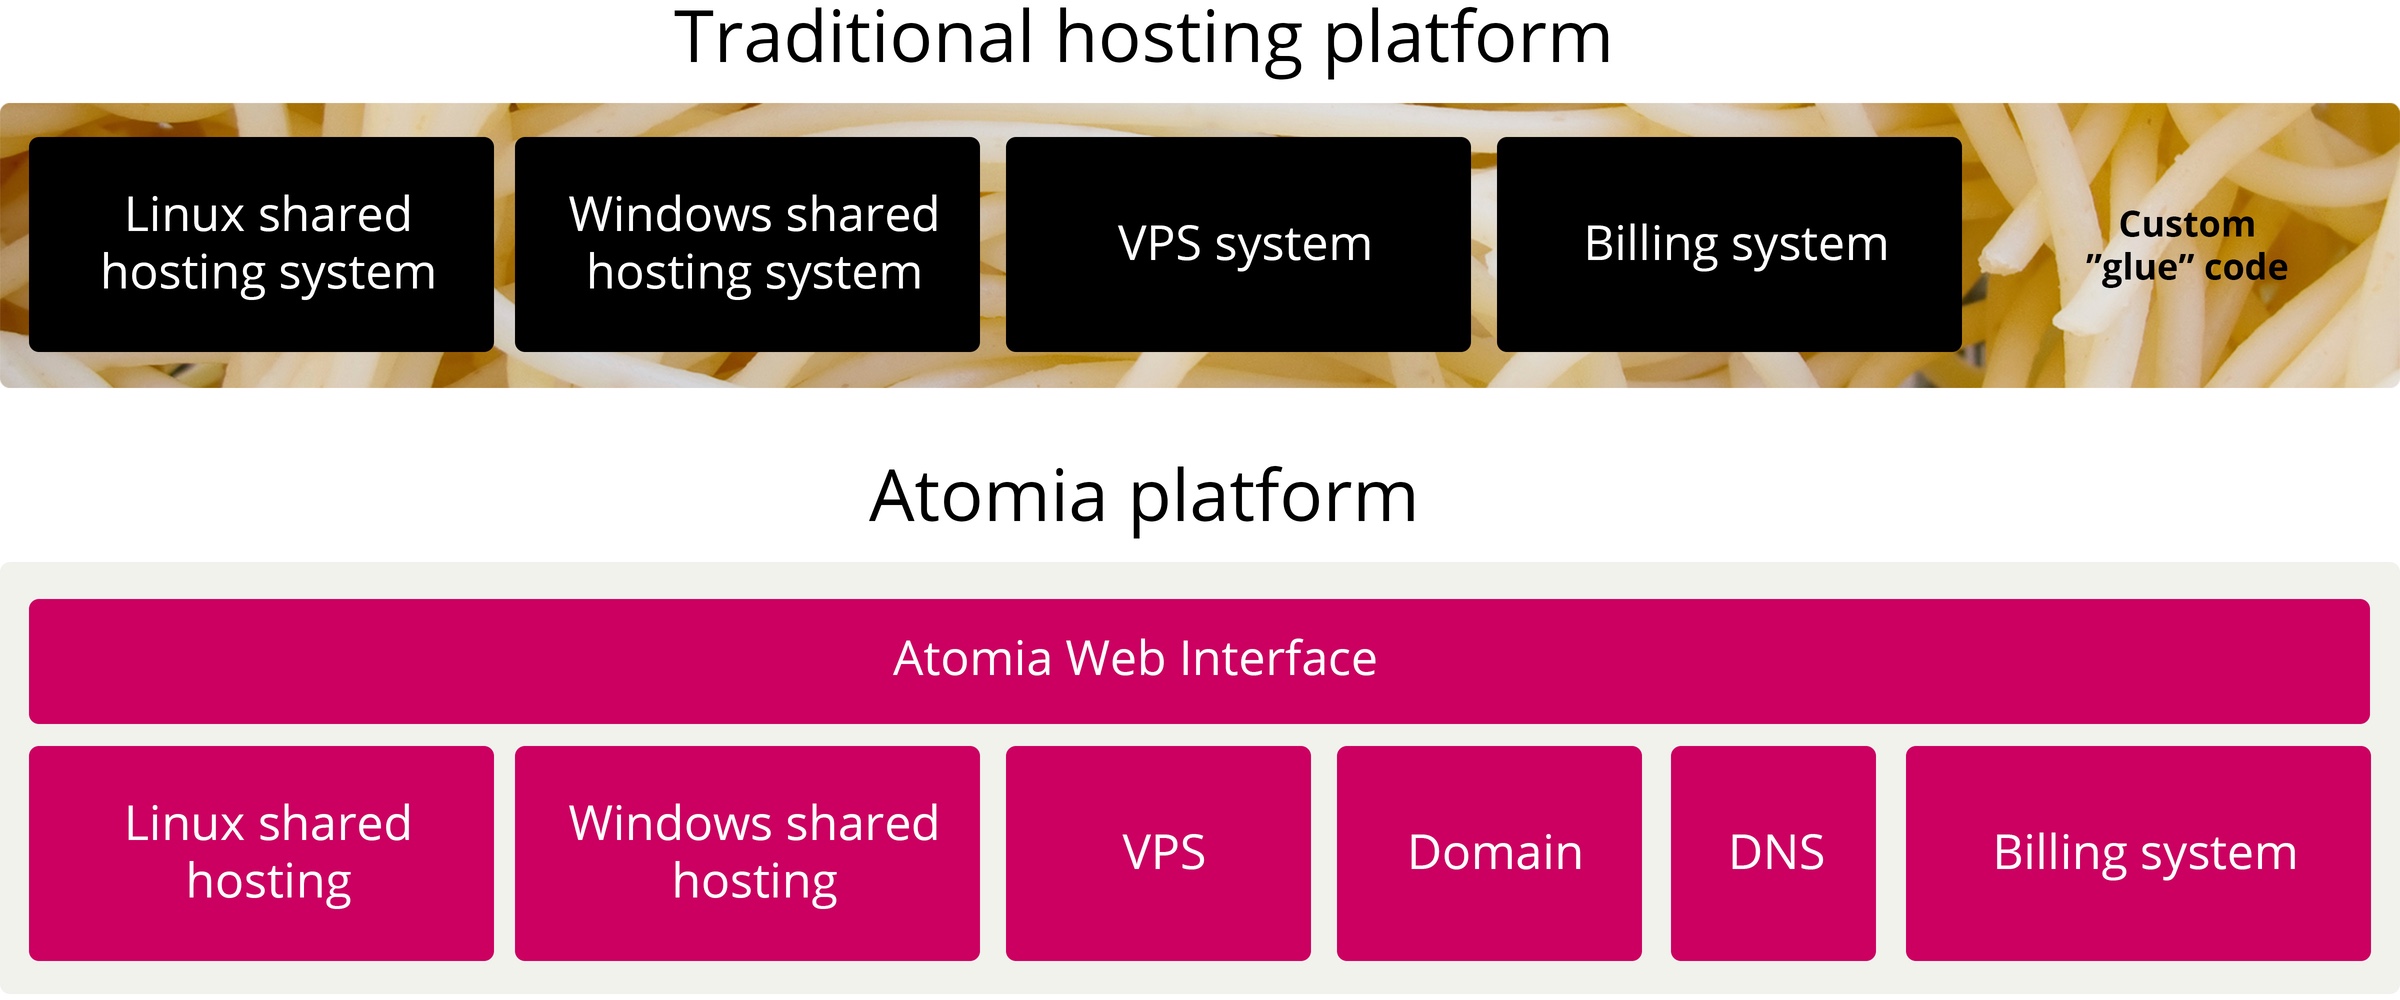  A comparison of traditional hosting platforms and the Atomi platform, which is a web-based platform that offers a variety of features for photographers, including a custom "glue" code.